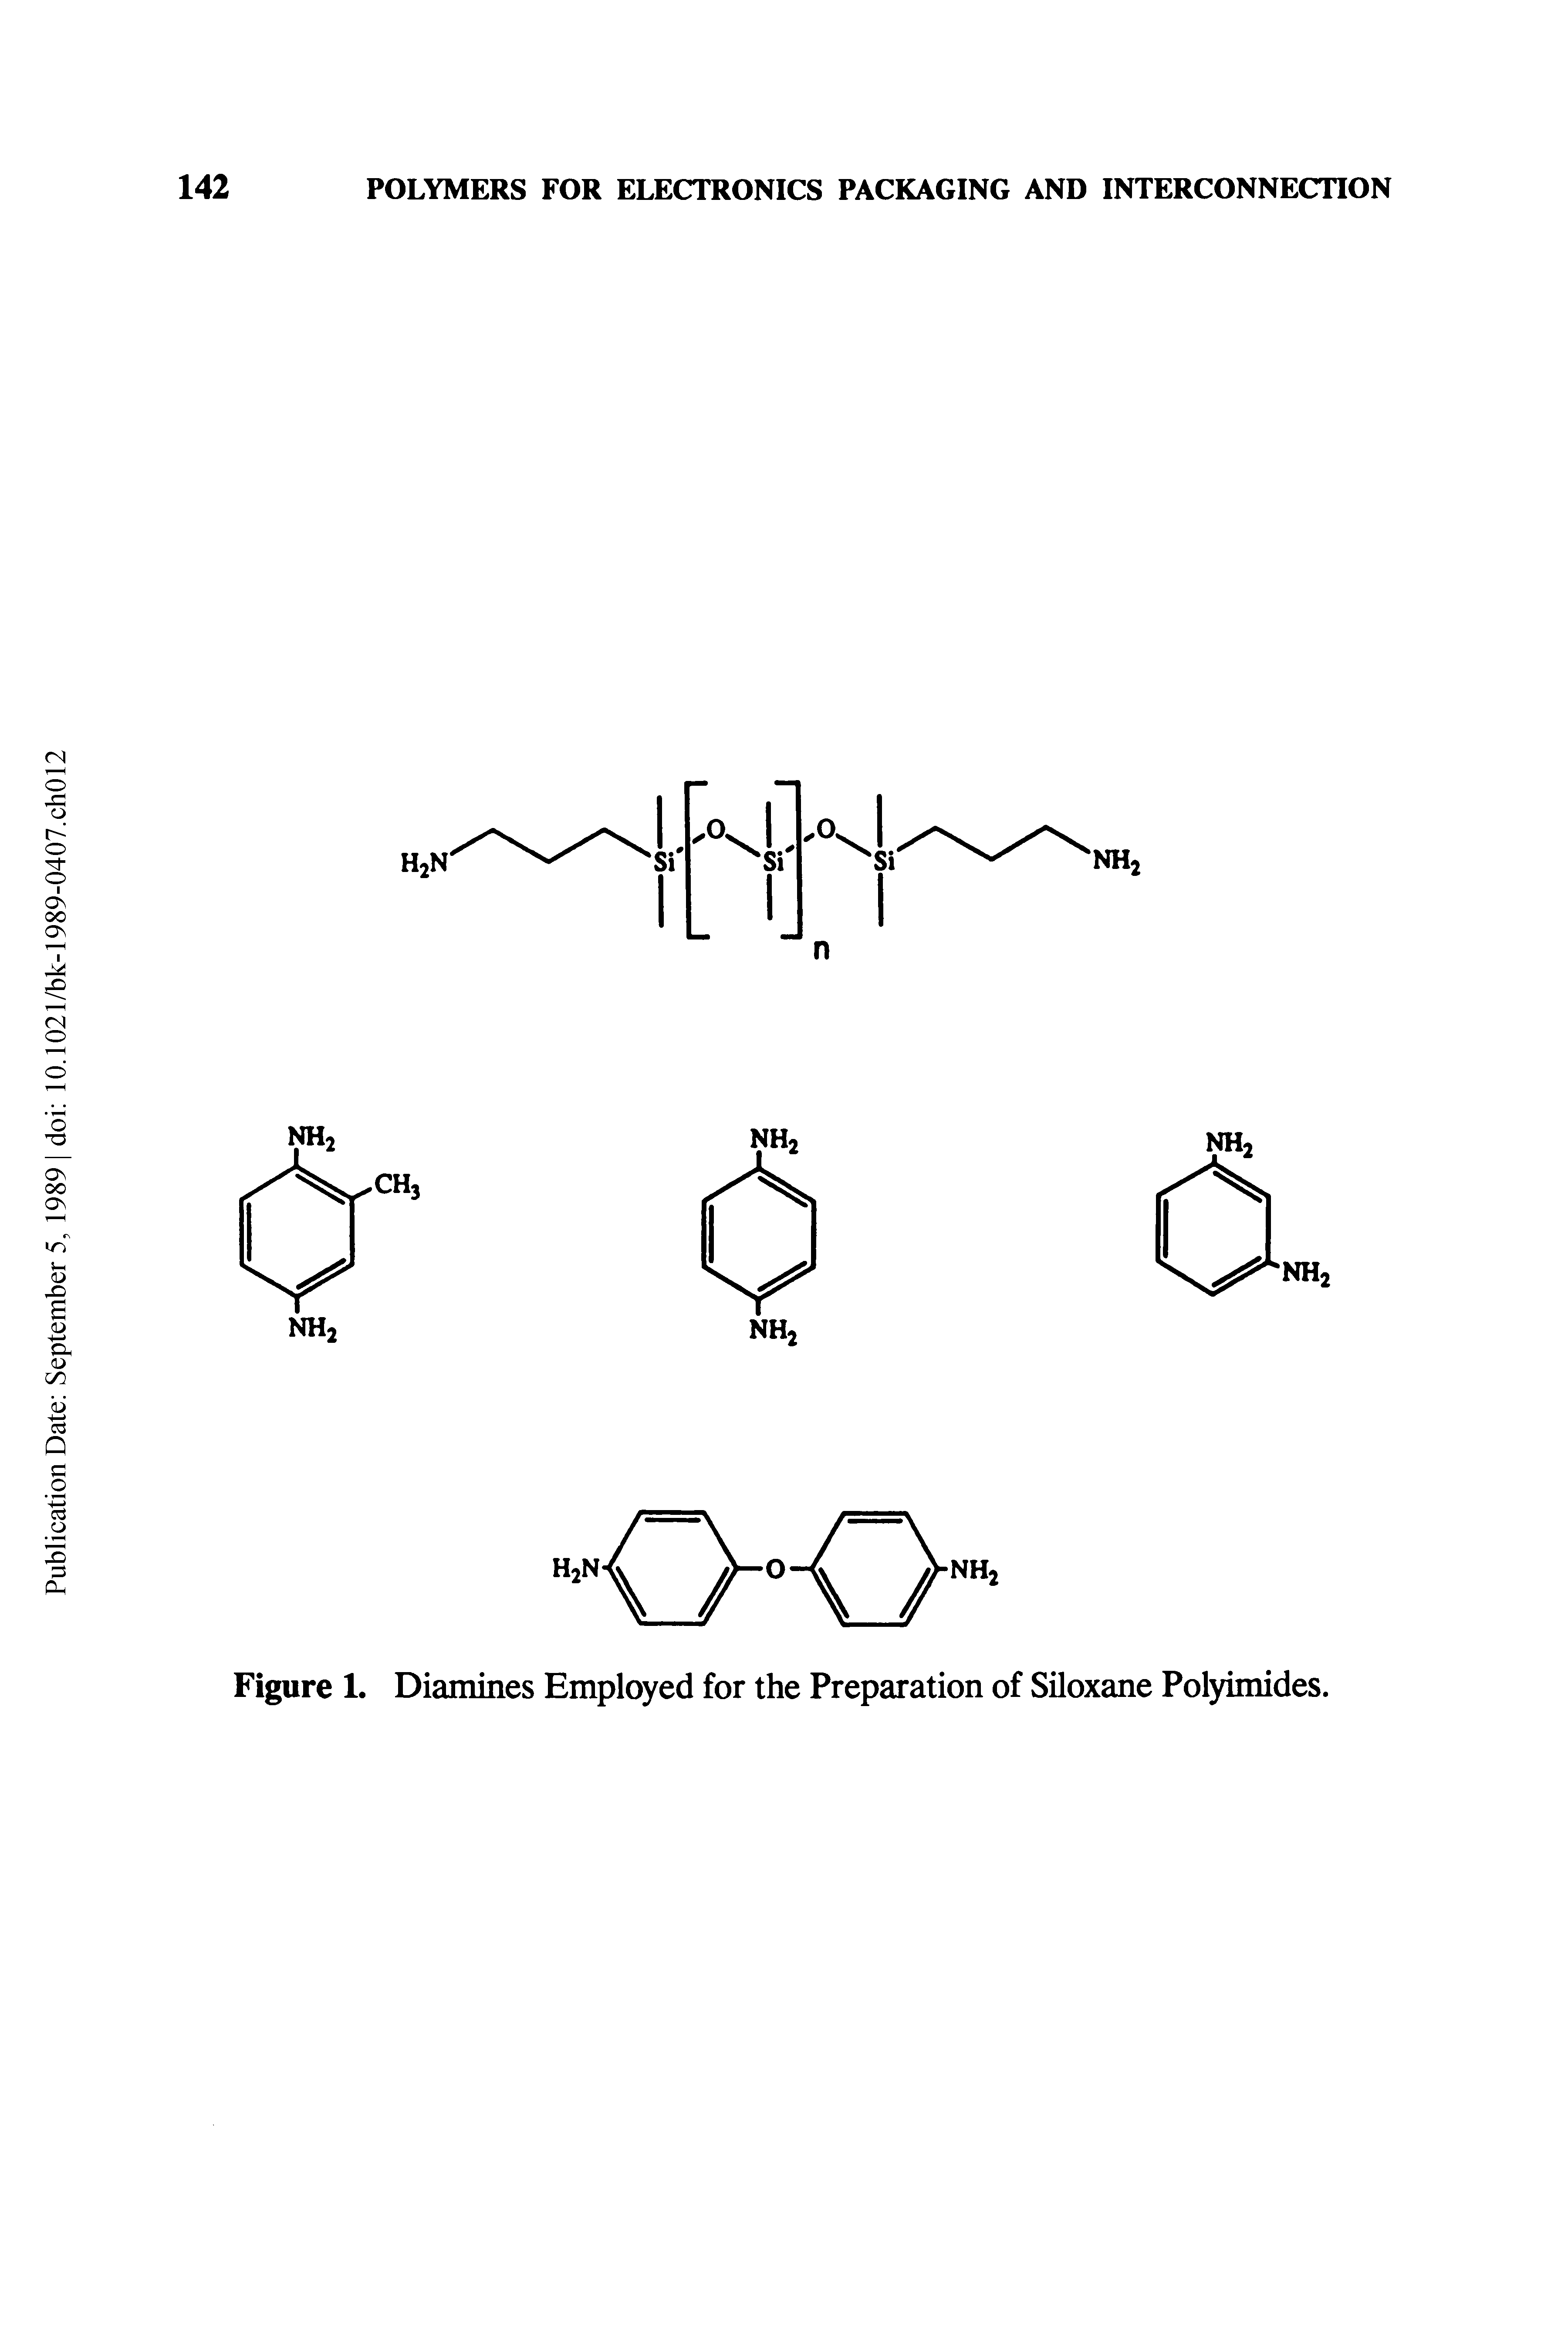 Figure 1. Diamines Employed for the Preparation of Siloxane Polyimides.